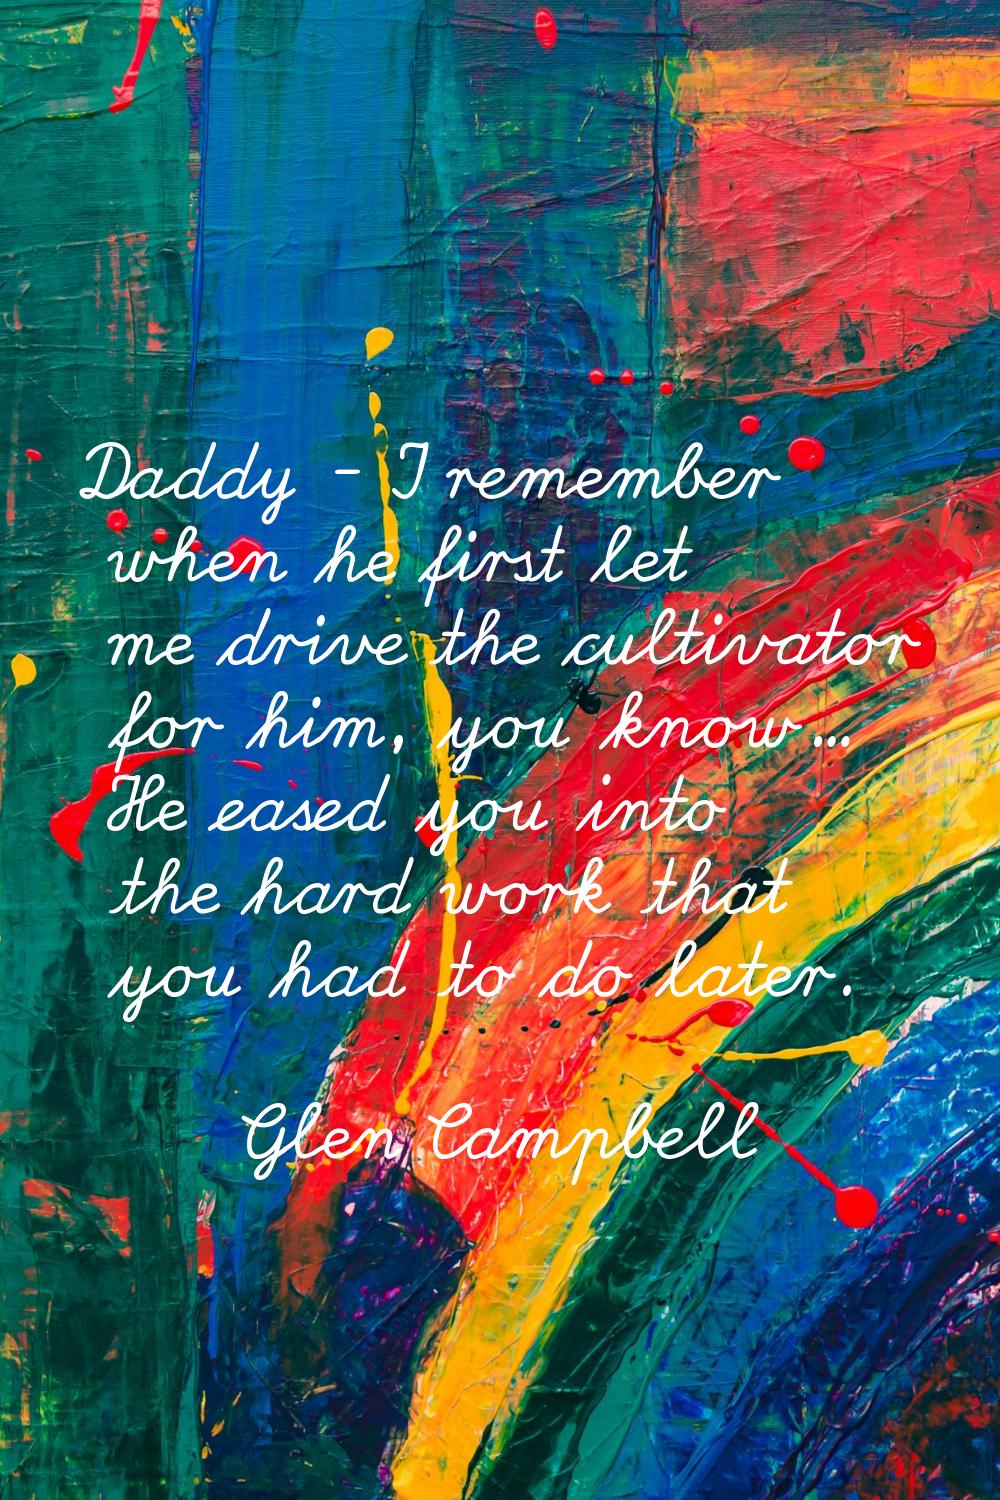 Daddy - I remember when he first let me drive the cultivator for him, you know... He eased you into